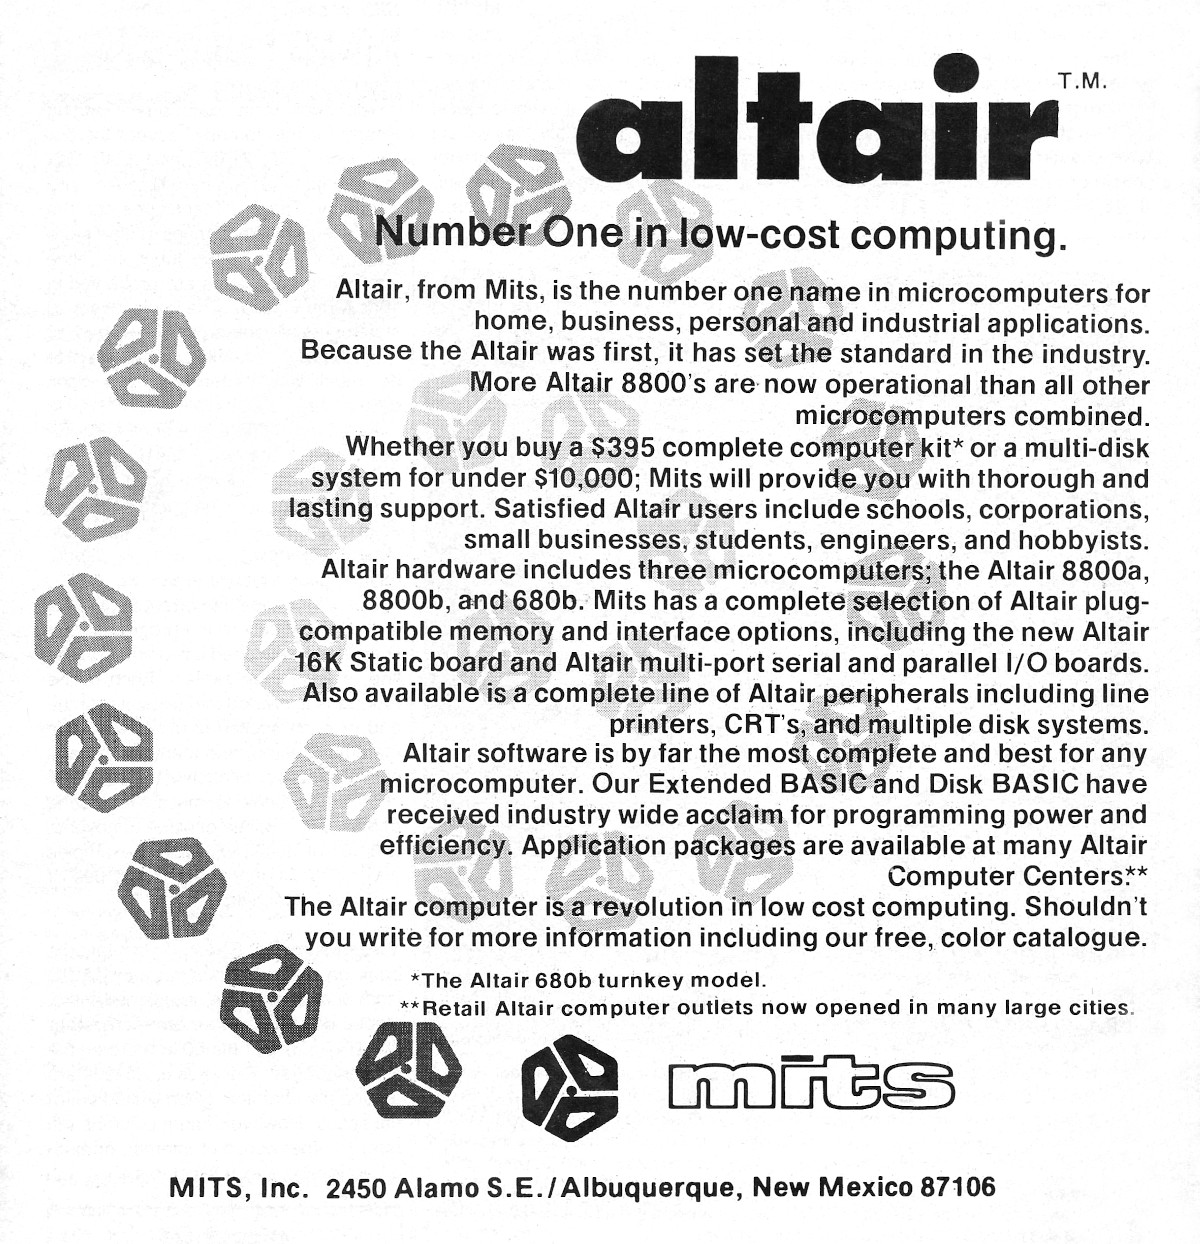 A text-heavy advert, primarily for the Altair, now branded as the 8<span class='hilite'><span class='hilite'><span class='hilite'>800</span></span></span>a, but also mentioning the 8<span class='hilite'><span class='hilite'><span class='hilite'>800</span></span></span>b version and the new 680b, based on the Motorola 6<span class='hilite'><span class='hilite'><span class='hilite'>800</span></span></span>. Prices, as featured in the December 1976 edition of Popular Electronics, ranged from £395 for the 